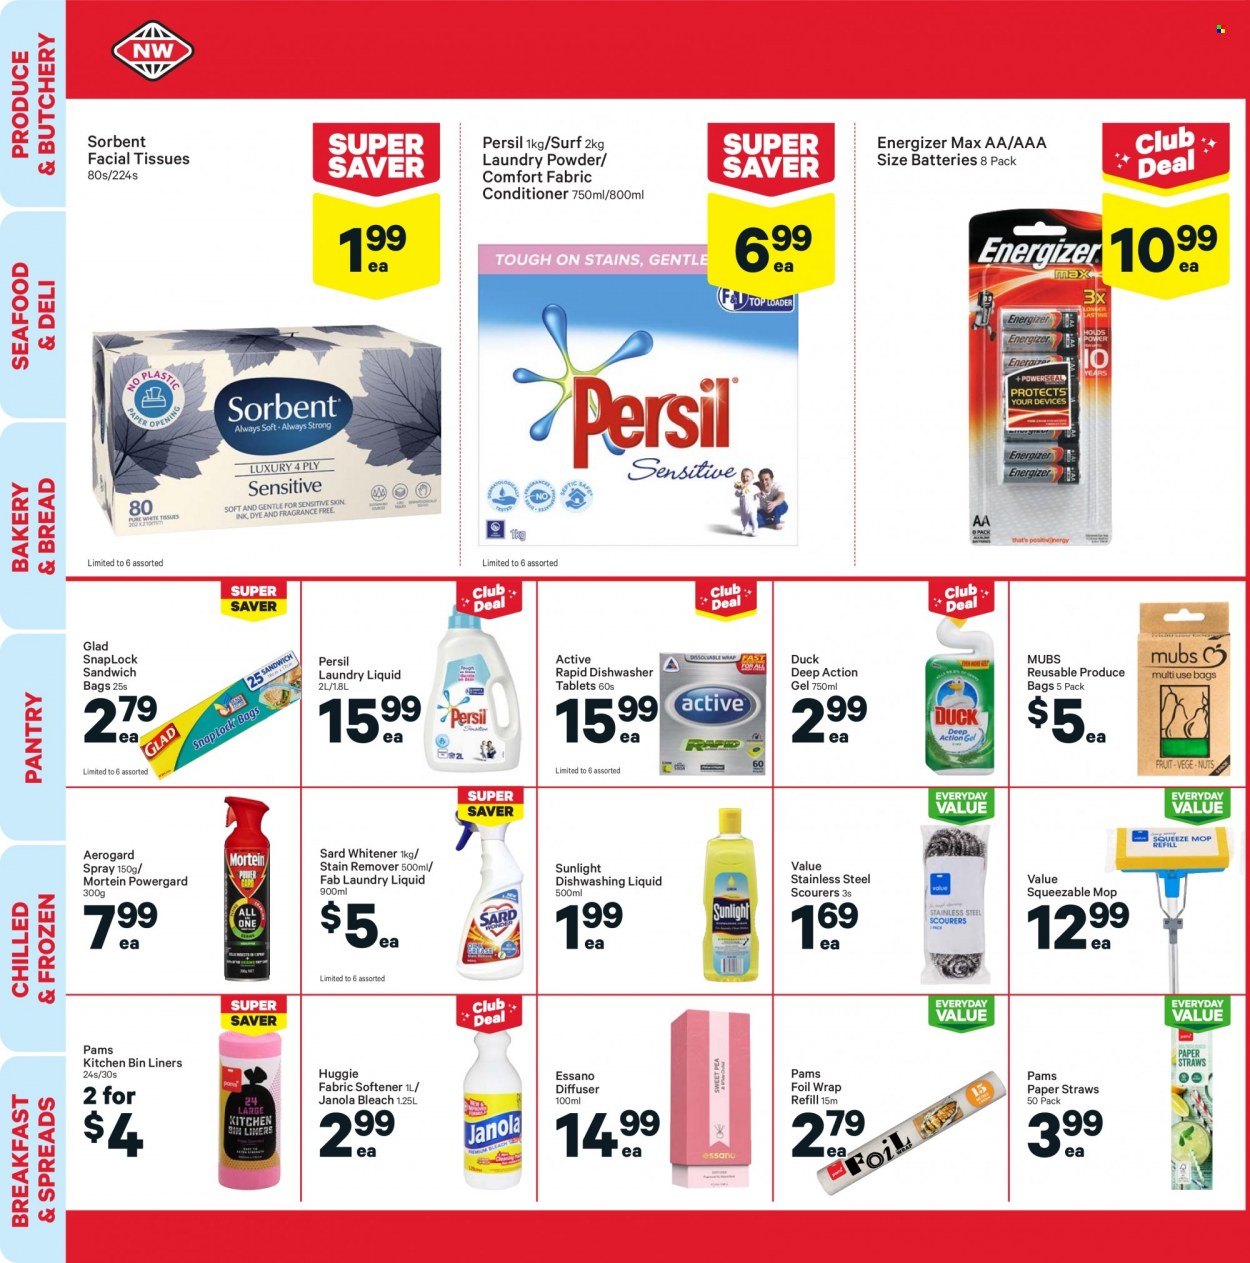 thumbnail - New World mailer - 11.10.2021 - 17.10.2021 - Sales products - bread, seafood, tissues, bleach, stain remover, Mortein, Persil, fabric softener, Fab, laundry detergent, laundry powder, Sunlight, Surf, Comfort softener, dishwashing liquid, dishwasher cleaner, dishwasher tablets, facial tissues, Essano, bag, bin, mop, straw, paper, diffuser, battery, Energizer. Page 26.